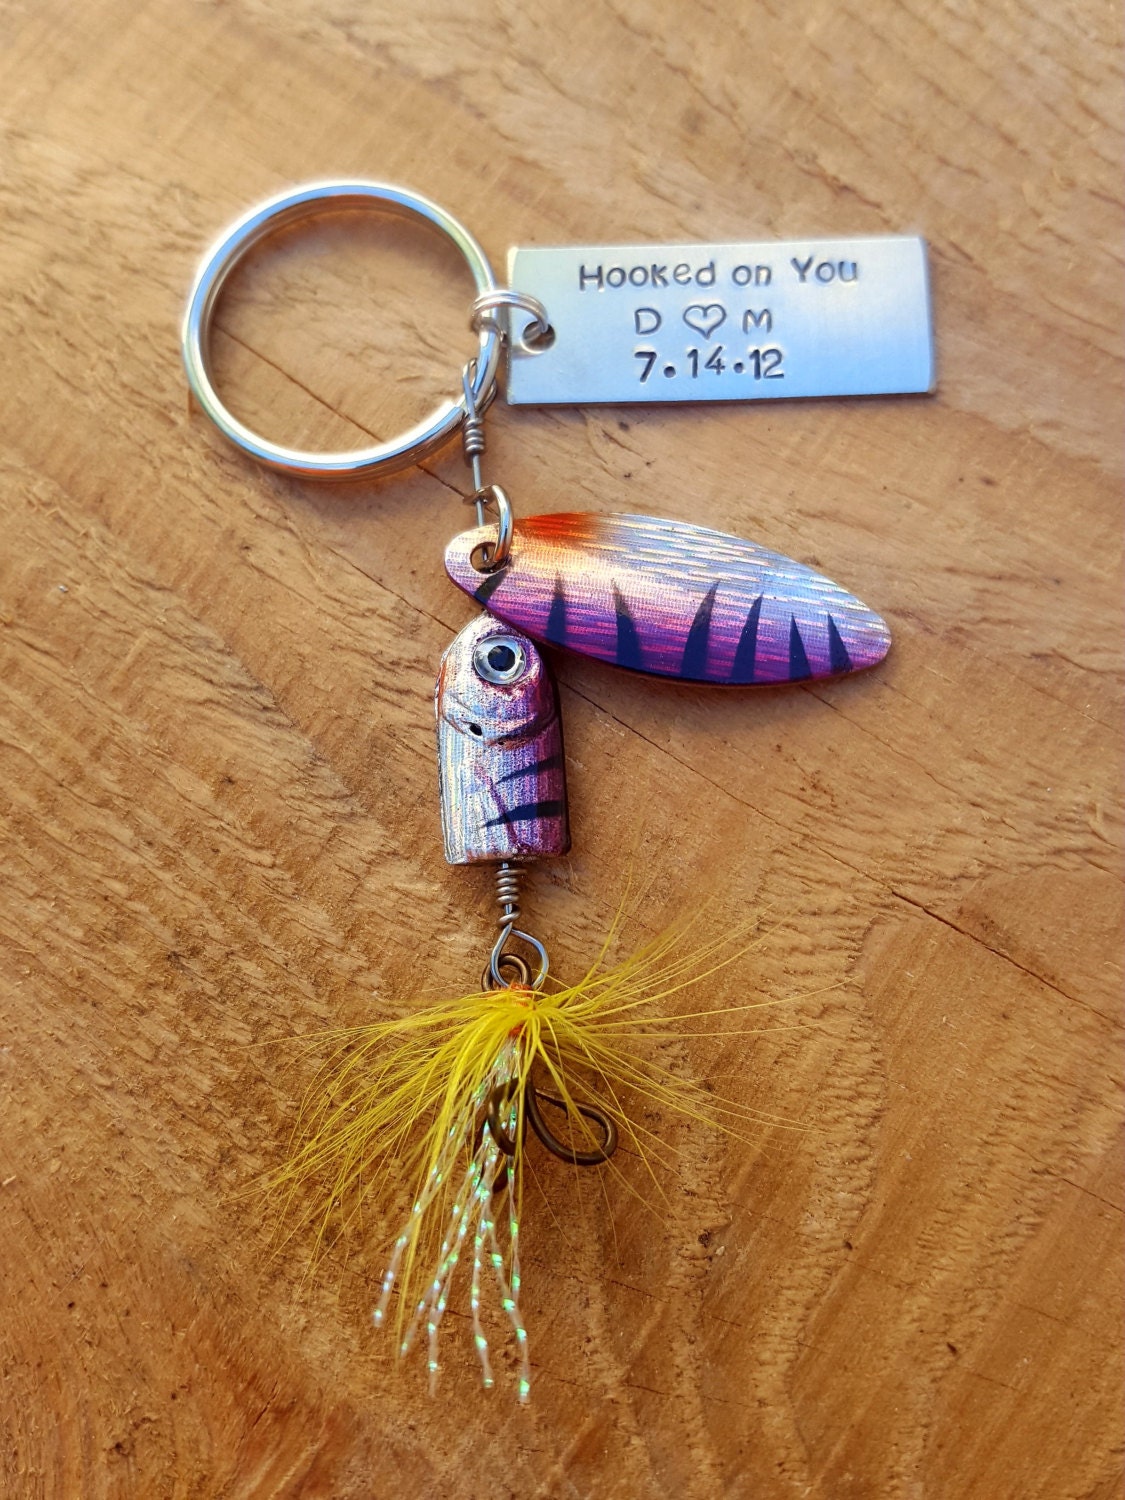 Minnow Fishing Lure Key Chain Personalize, Customized, Hooked on You -   Israel